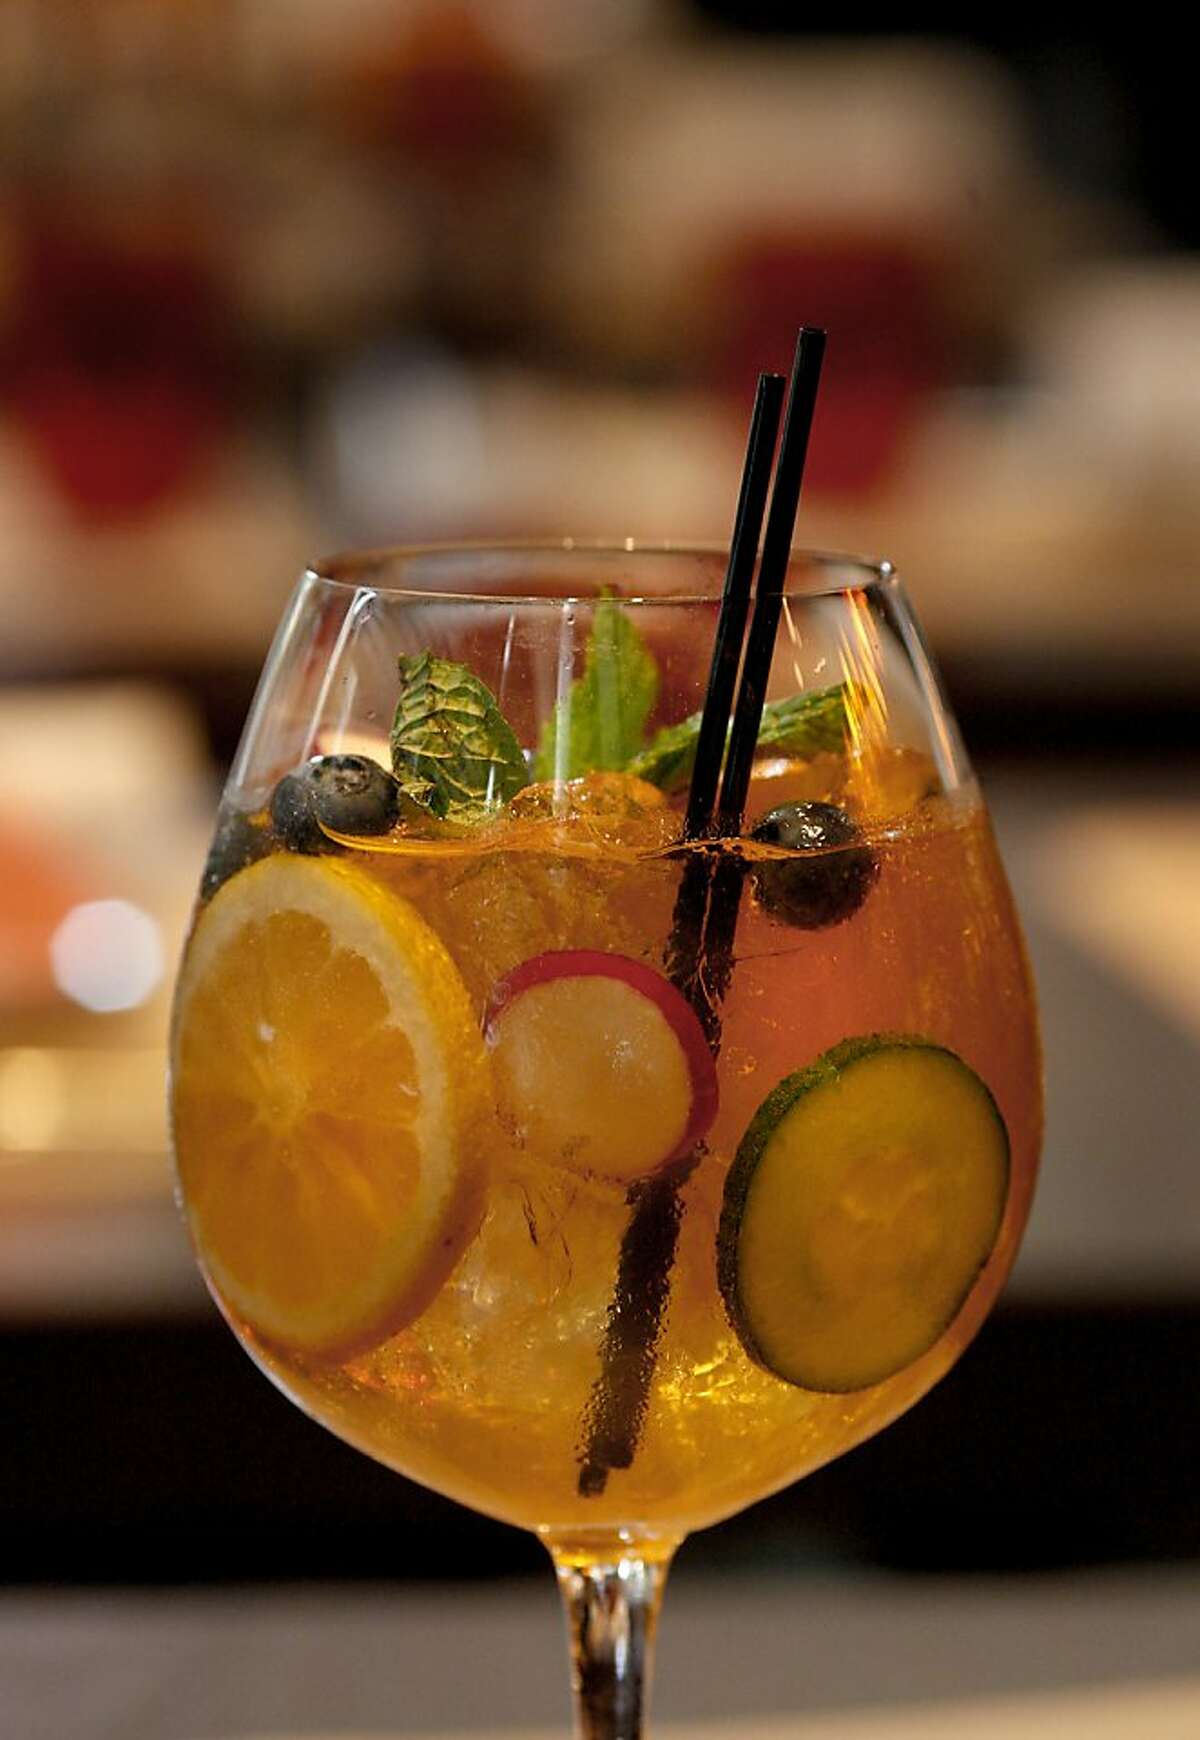 The "Pimms" 74 cocktail features seasonal fruit. RN74 is located in the Millennium tower near Mission and Beale Streets in downtown San Francisco, CA.